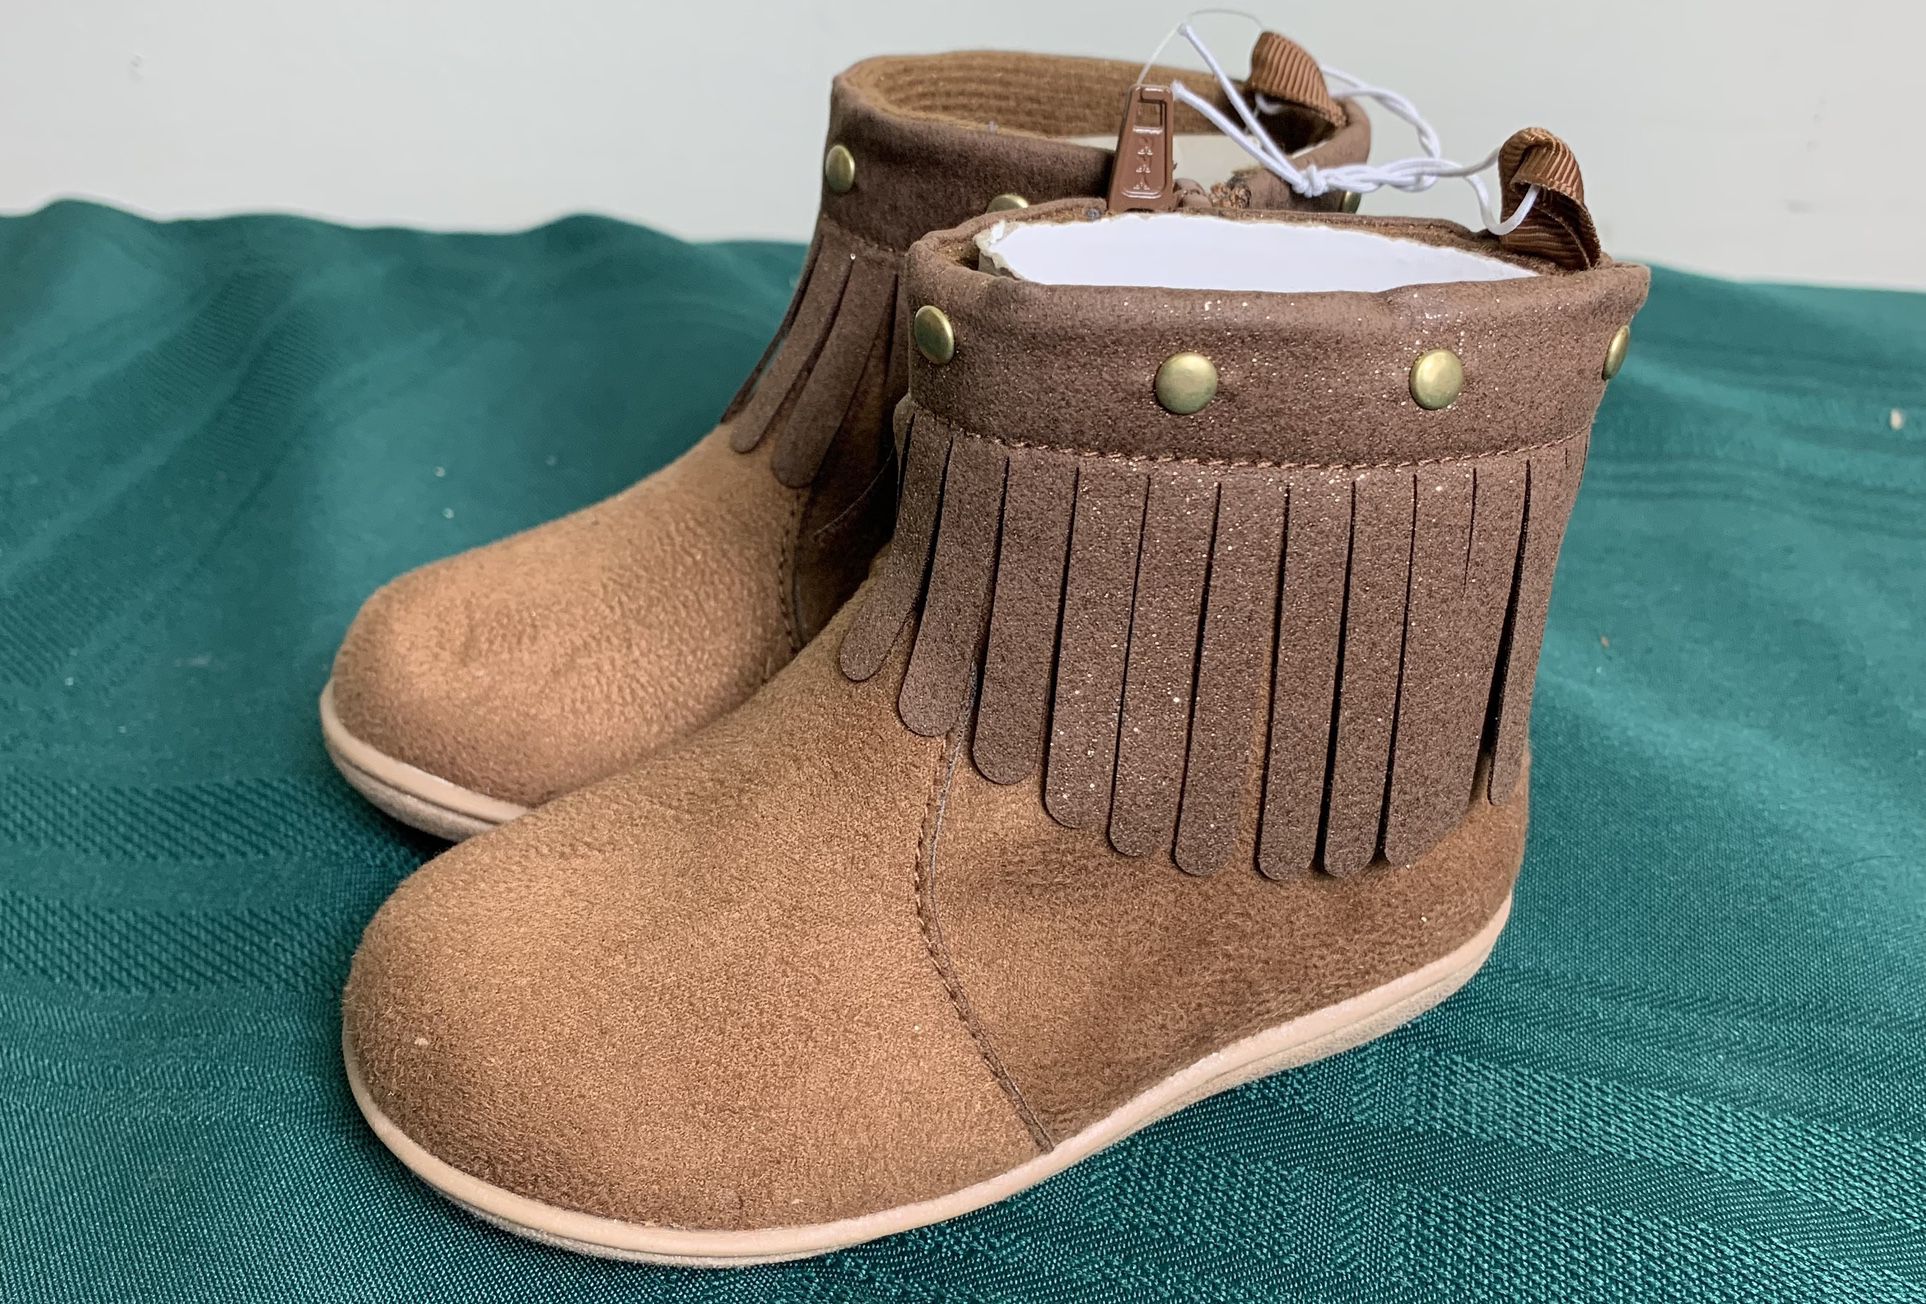 New Koala Kids toddler girl size 5 brown suede studded fringed booties ankle boots with zippers 